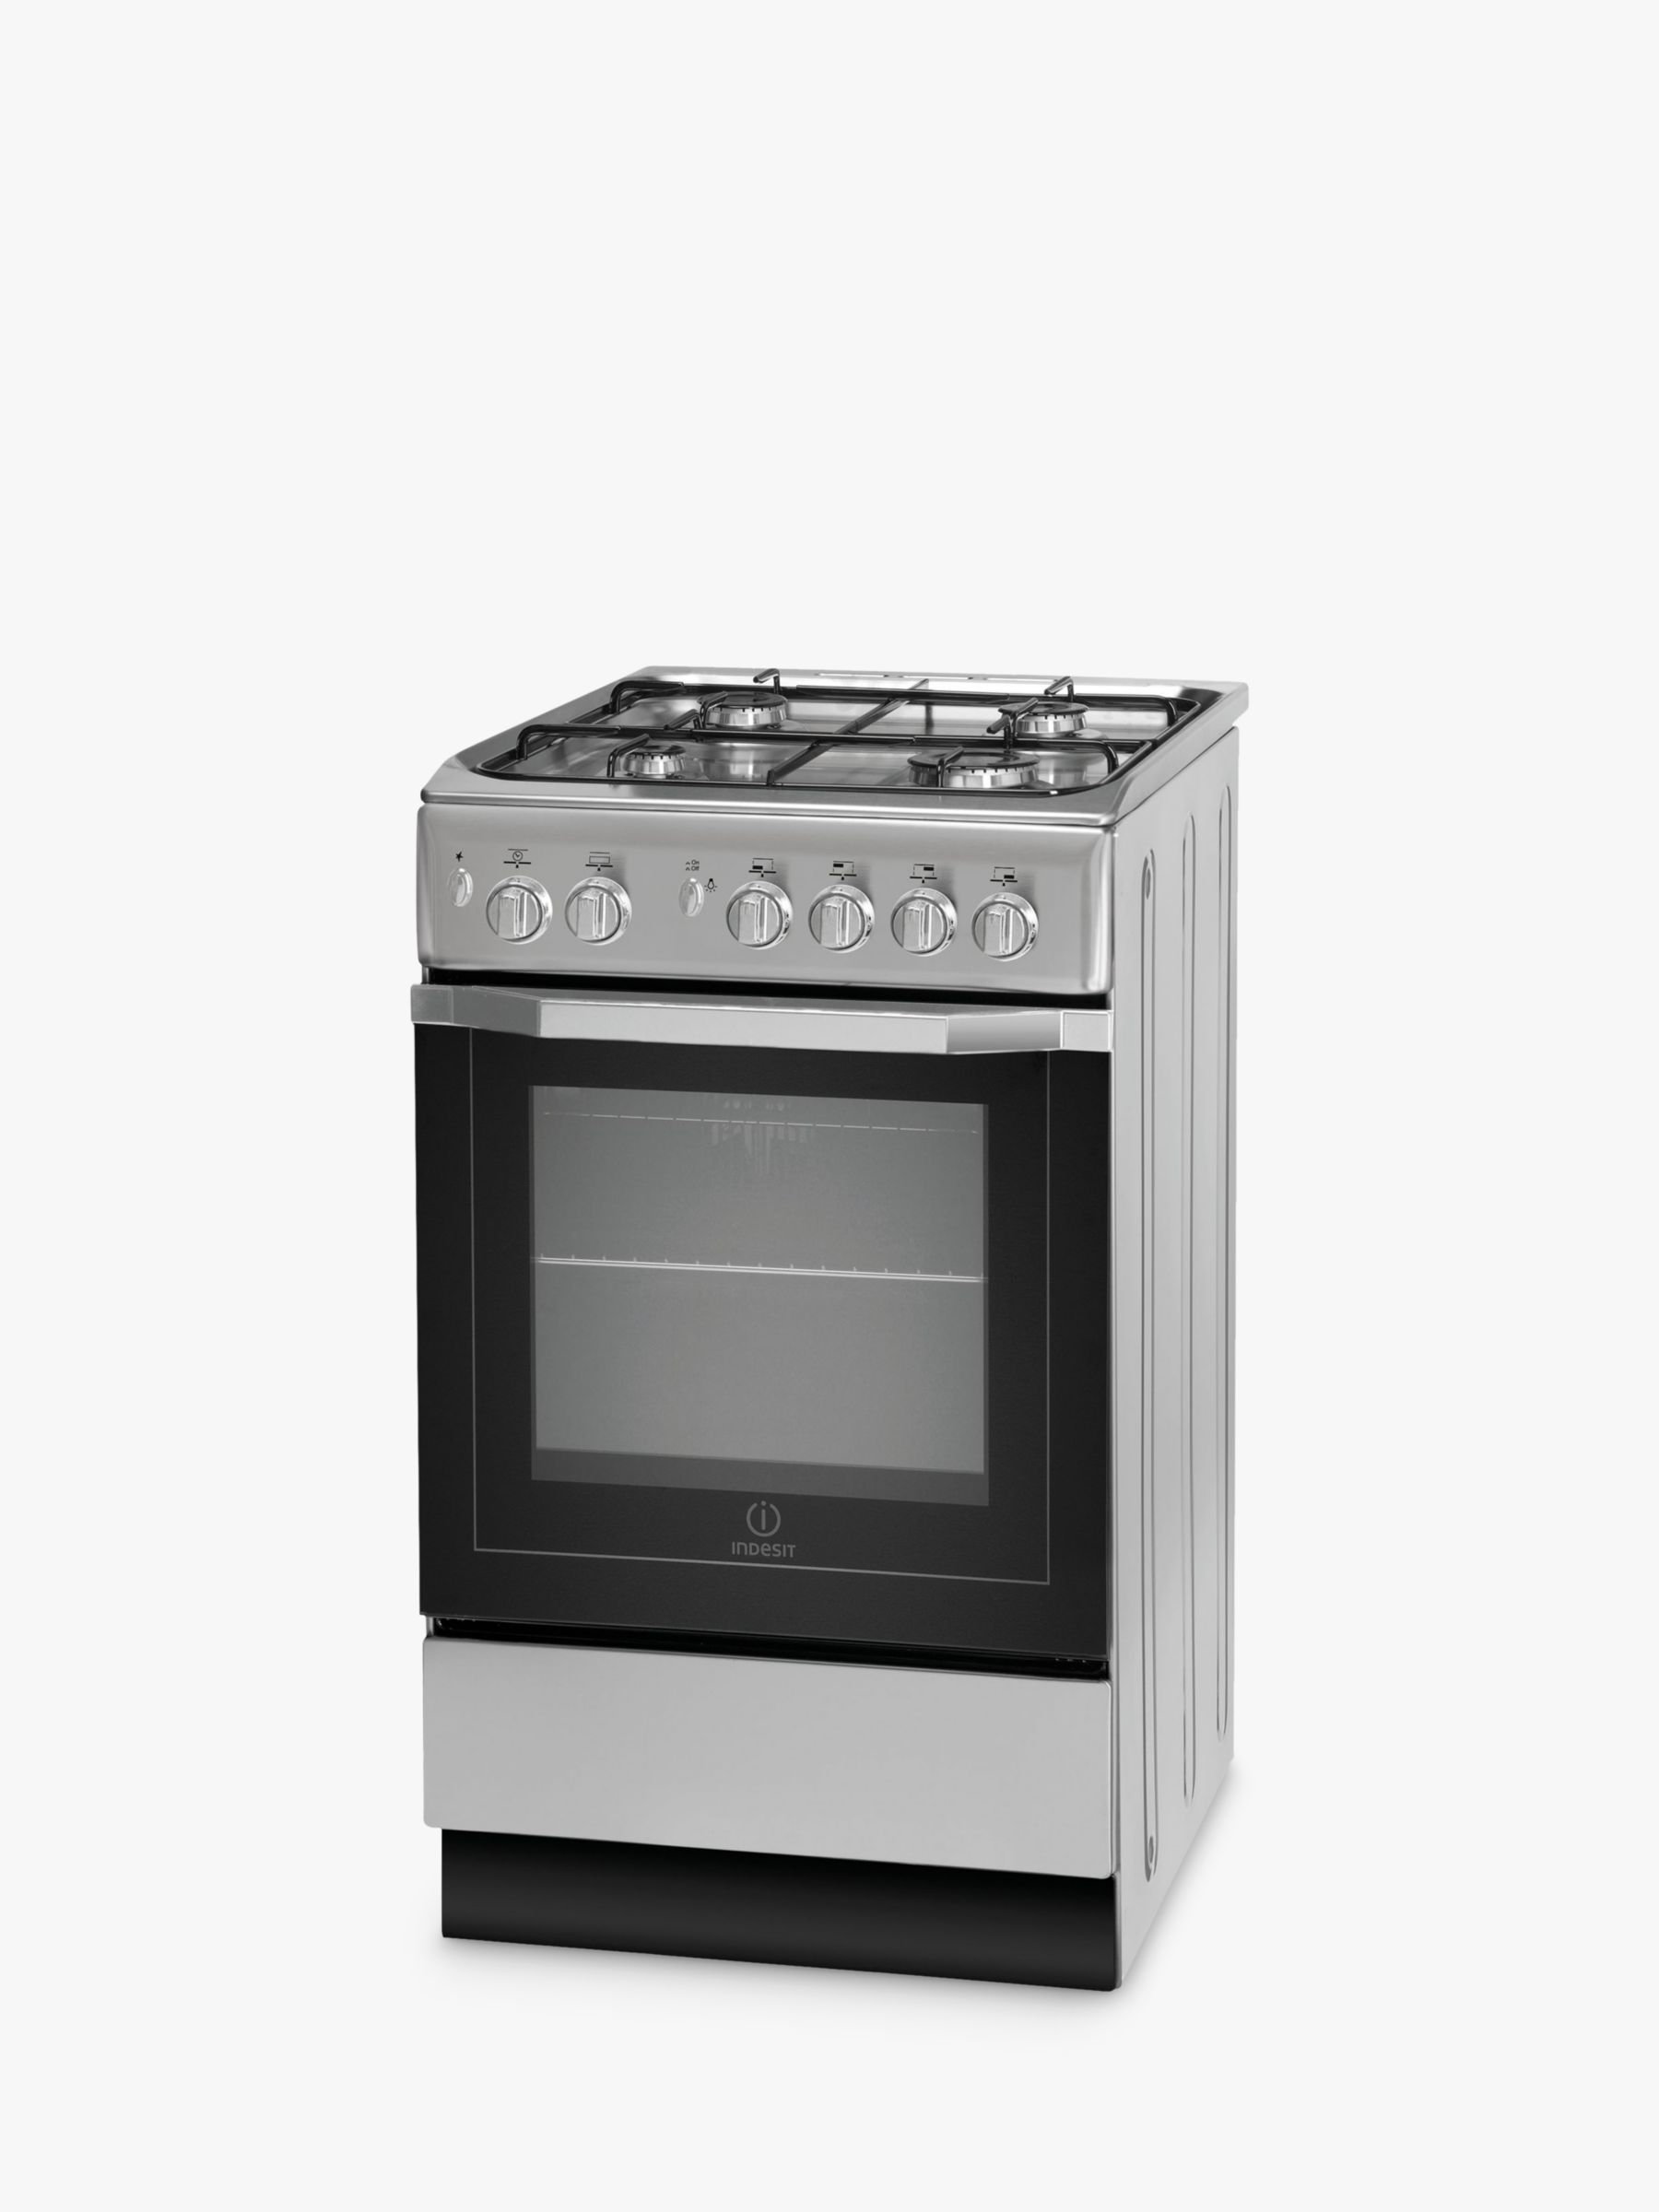 Indesit I5GG1S Freestanding Gas Cooker, Silver